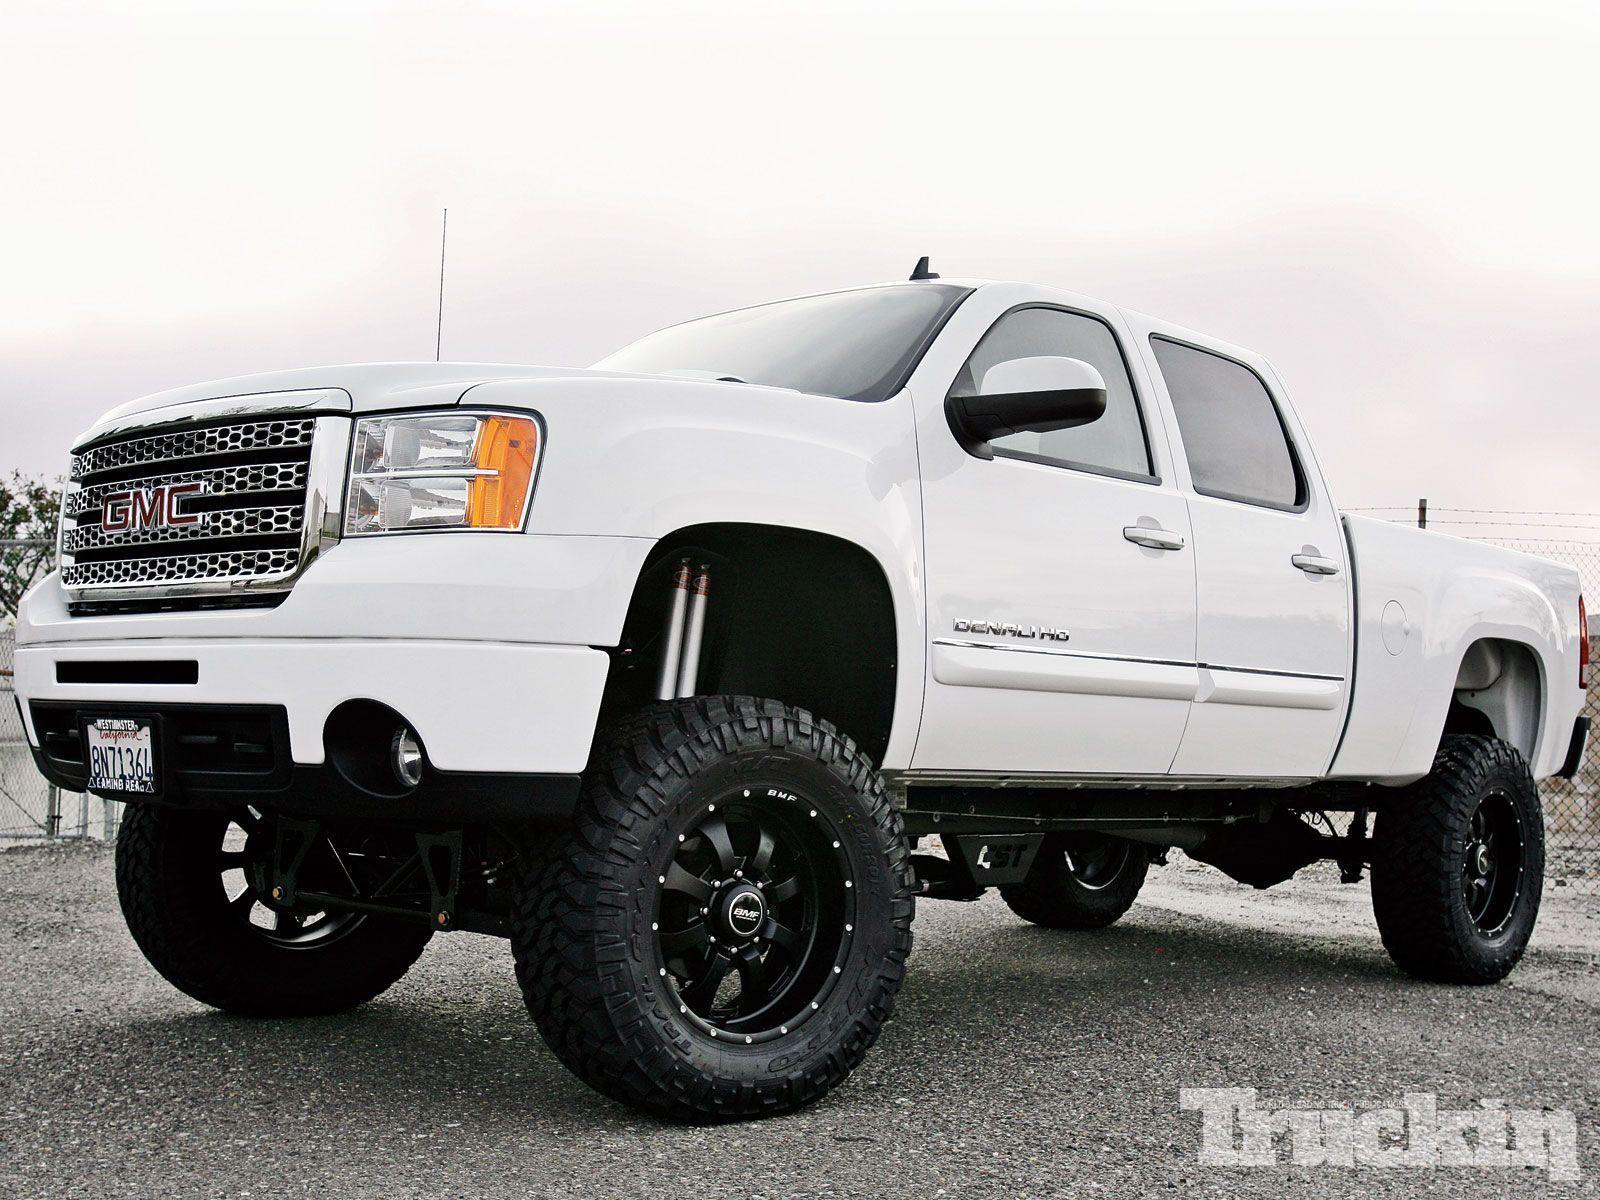 Beast Within: Lift Kit on a 2008 GMC Sierra 2500HD Photo & Image Gallery